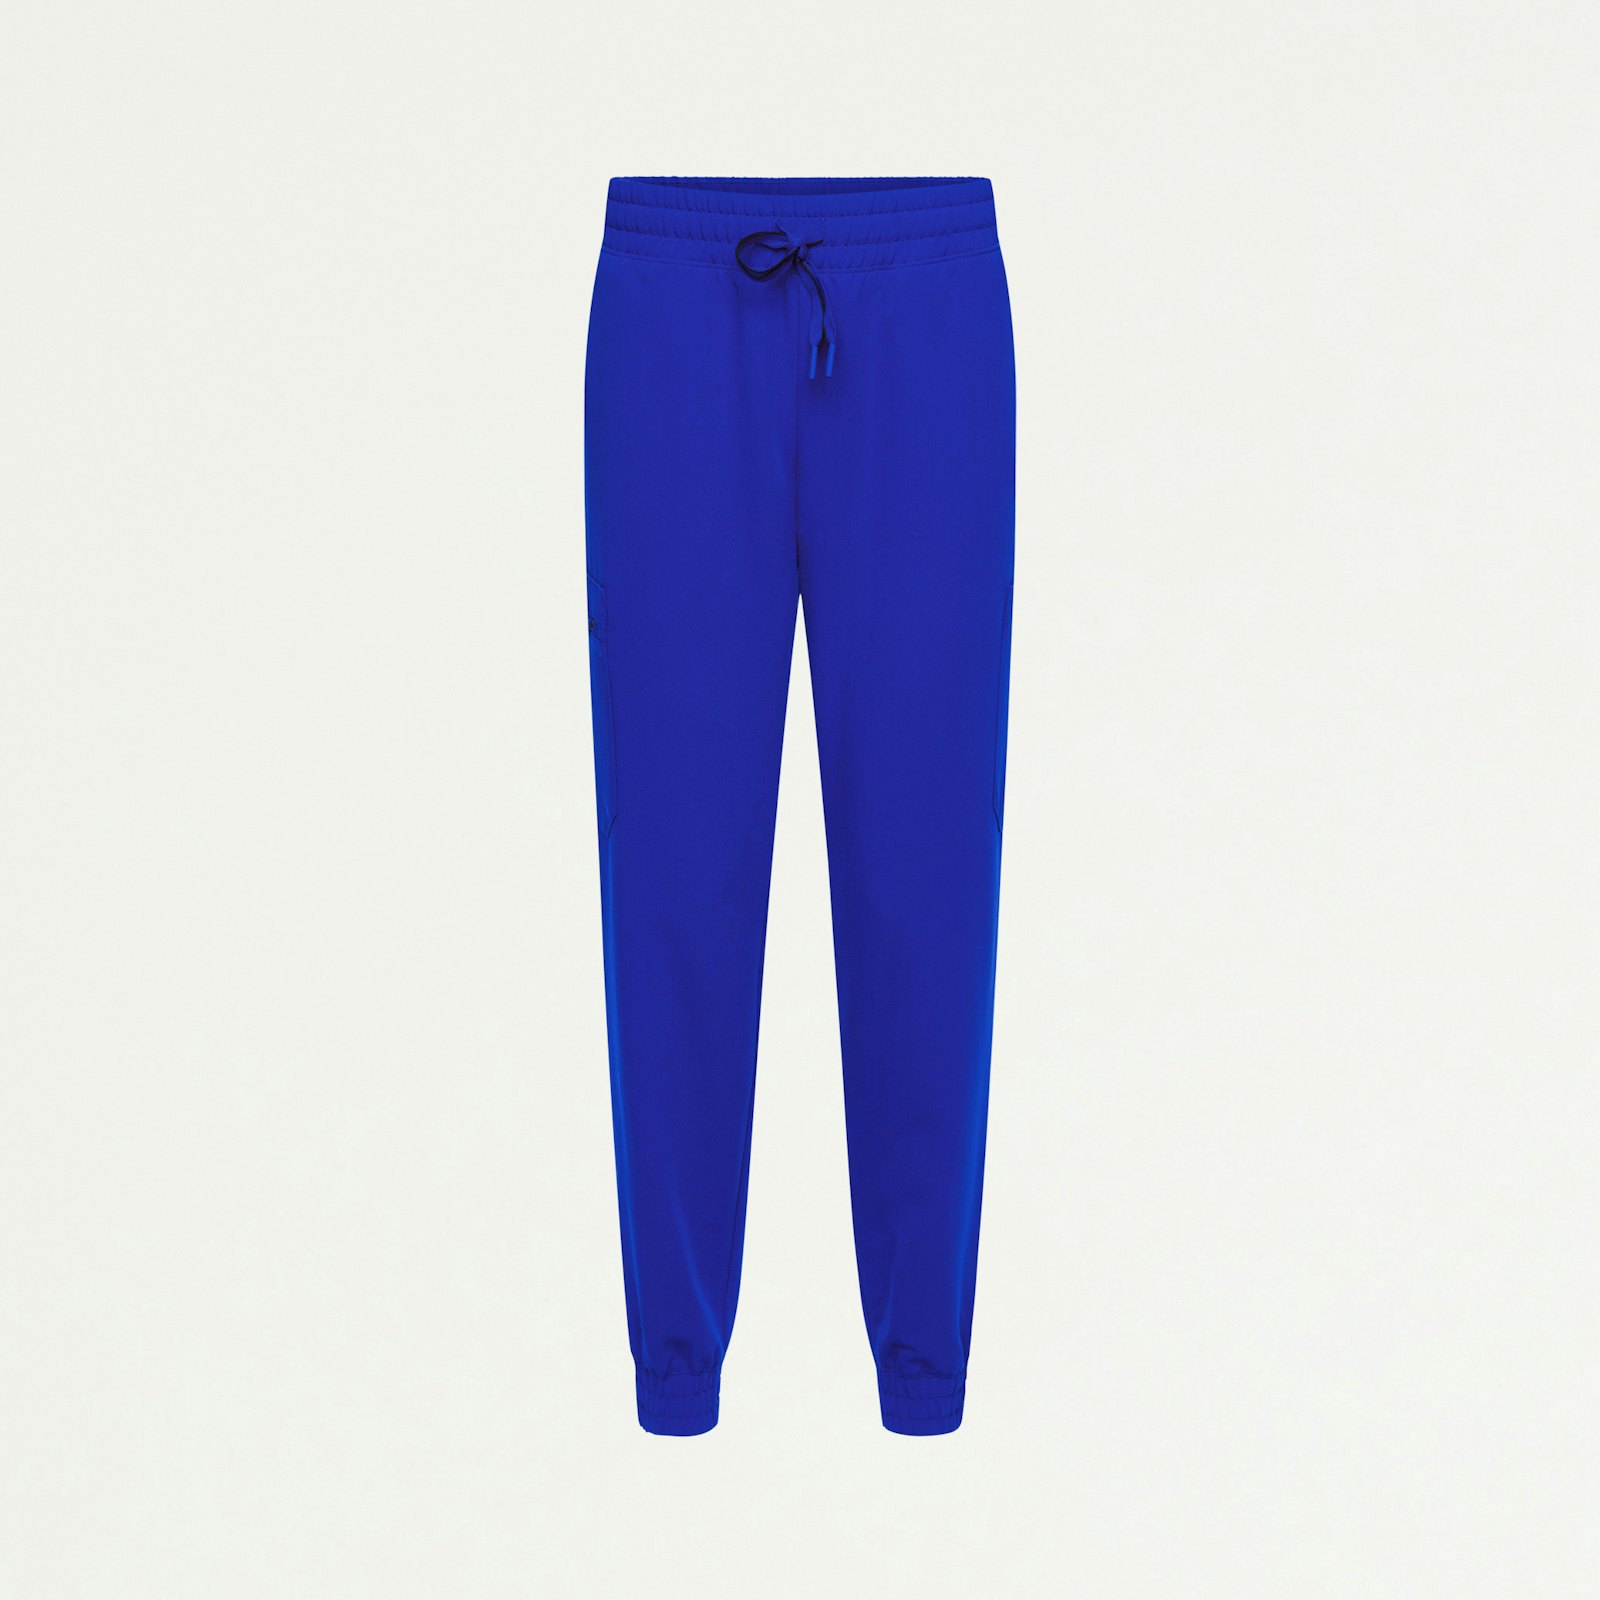 Neo Classic Scrub Jogger in Electric Blue - Women's Pants by Jaanuu